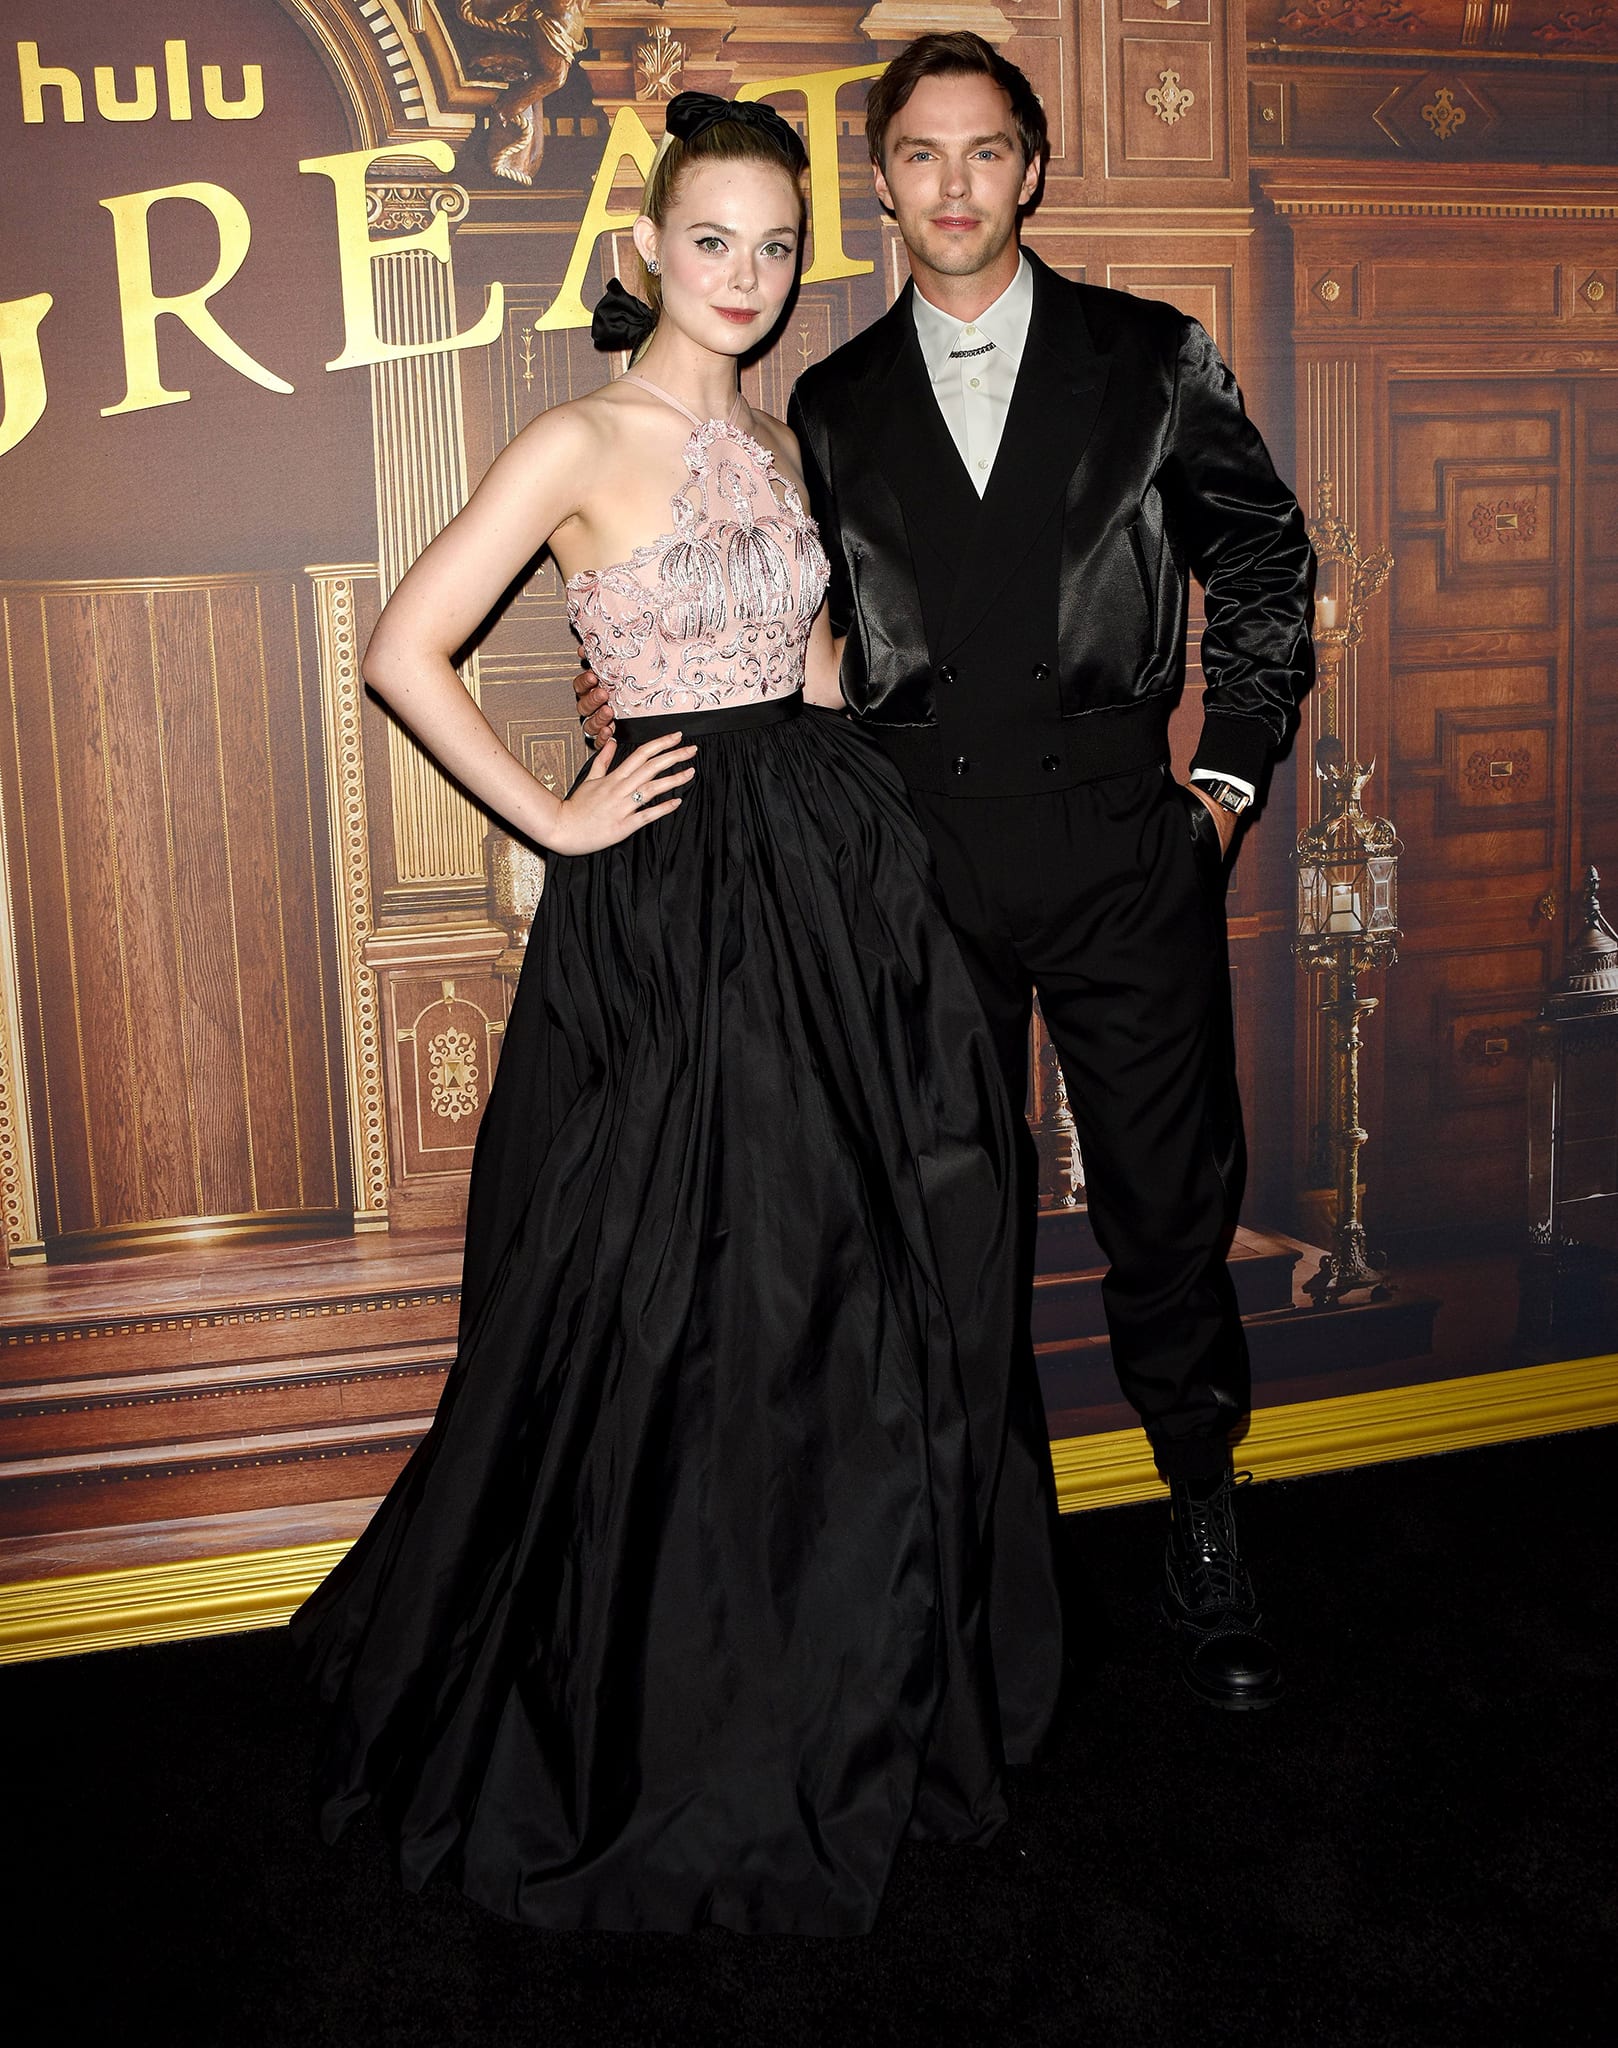 Elle Fanning and Nicholas Hoult at the season two premiere of The Great held at the Sunset Room Hollywood on November 14, 2021